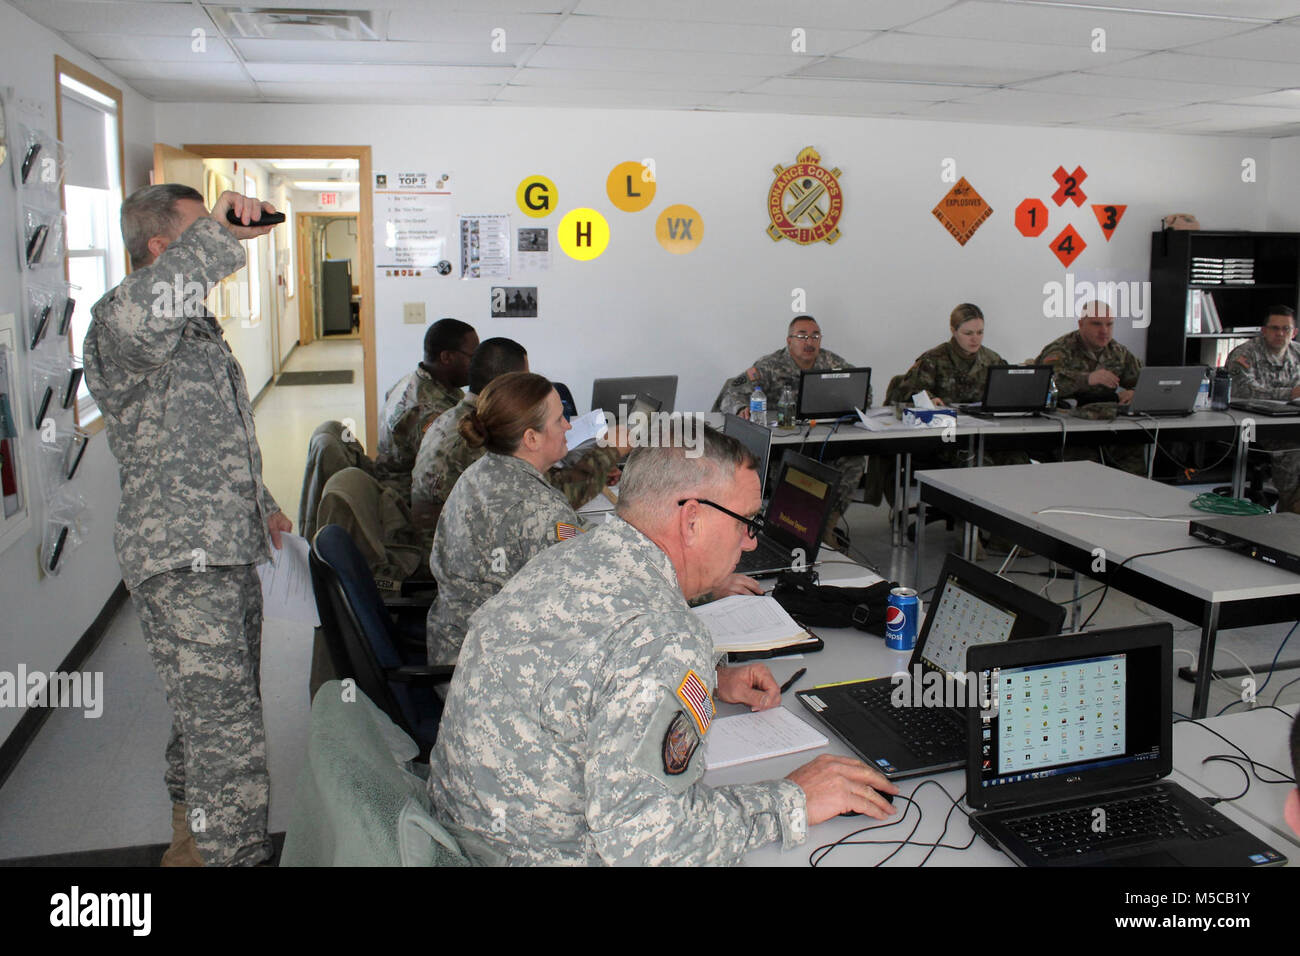 Students and instructors complete a project in the 89B Advanced Leader Course, a course taught by the 13th Battalion, 100th Regiment, on Jan. 16, 2018, at Fort McCoy, Wis. The 13th, 100th is an ordnance battalion that provides training and training support to Soldiers in the ordnance maintenance military occupational specialty series. The unit, aligned under the 3rd Brigade, 94th Division of the 80th Training Command, has been at Fort McCoy since about 1995. (U.S. Army Stock Photo